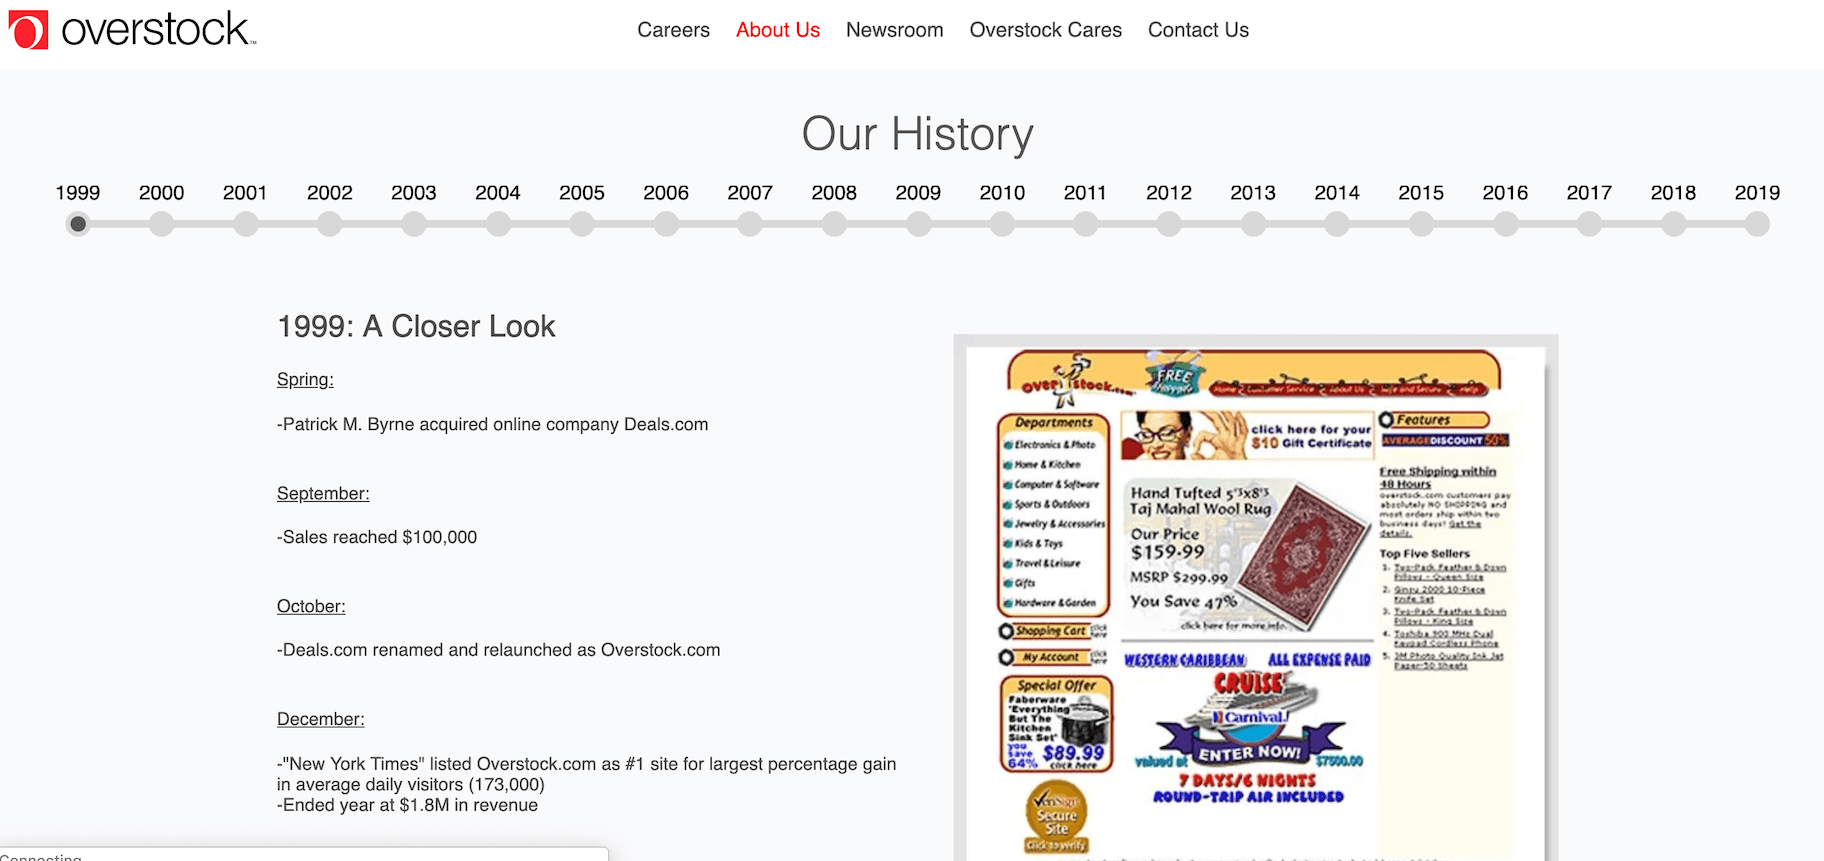 Overstock About Us Page Sample